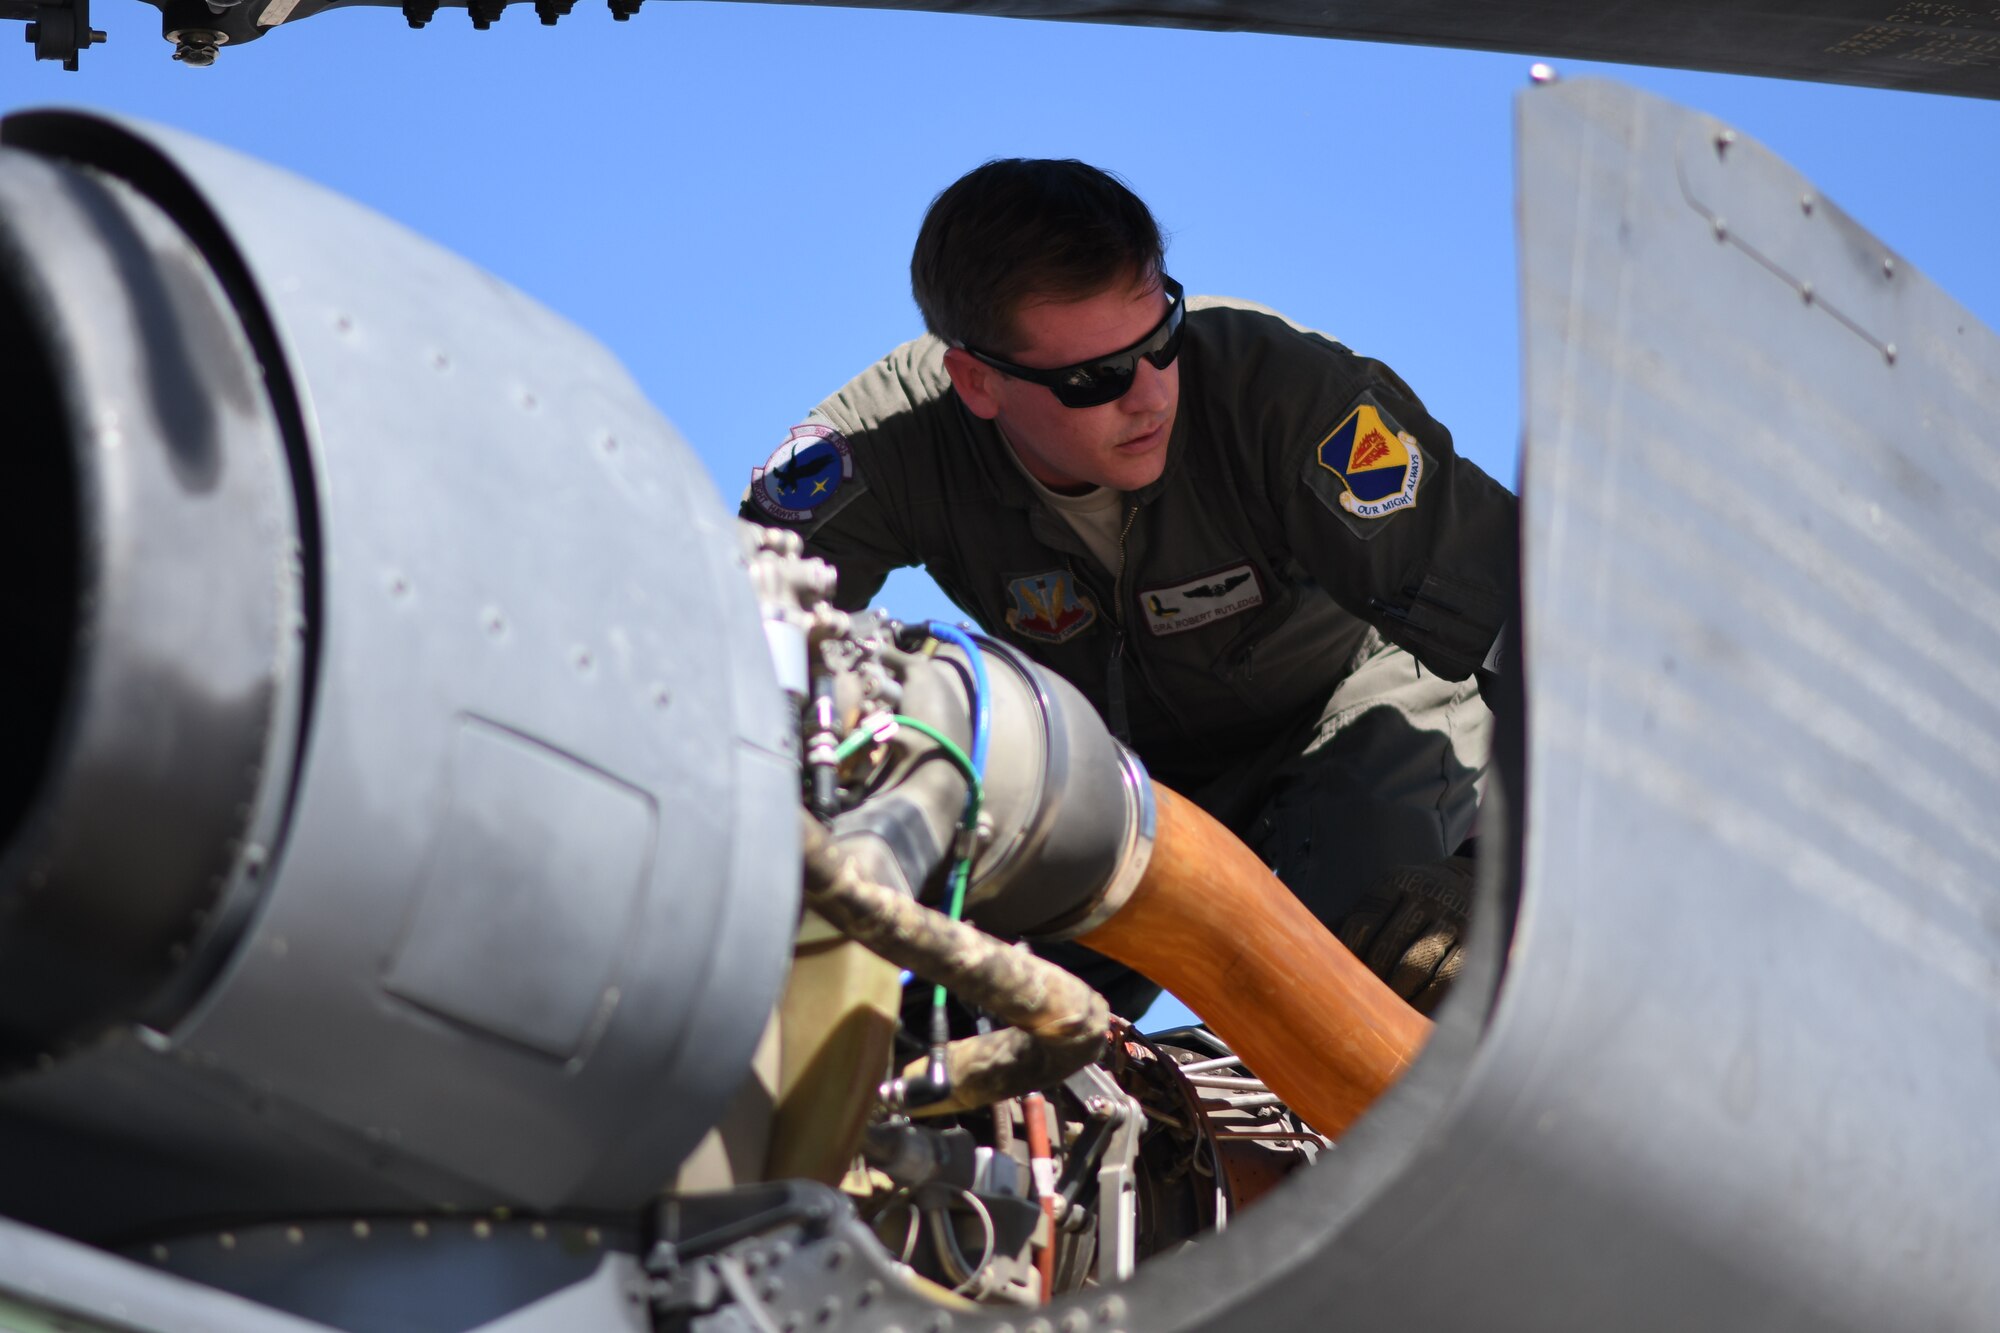 Davis-Monthan Air Force Base underwent a large-scale exercise to prepare to deploy to any austere and contested location around the world. Using the multi-functional Airmen to establish, sustain and defend the base with organic command and control.